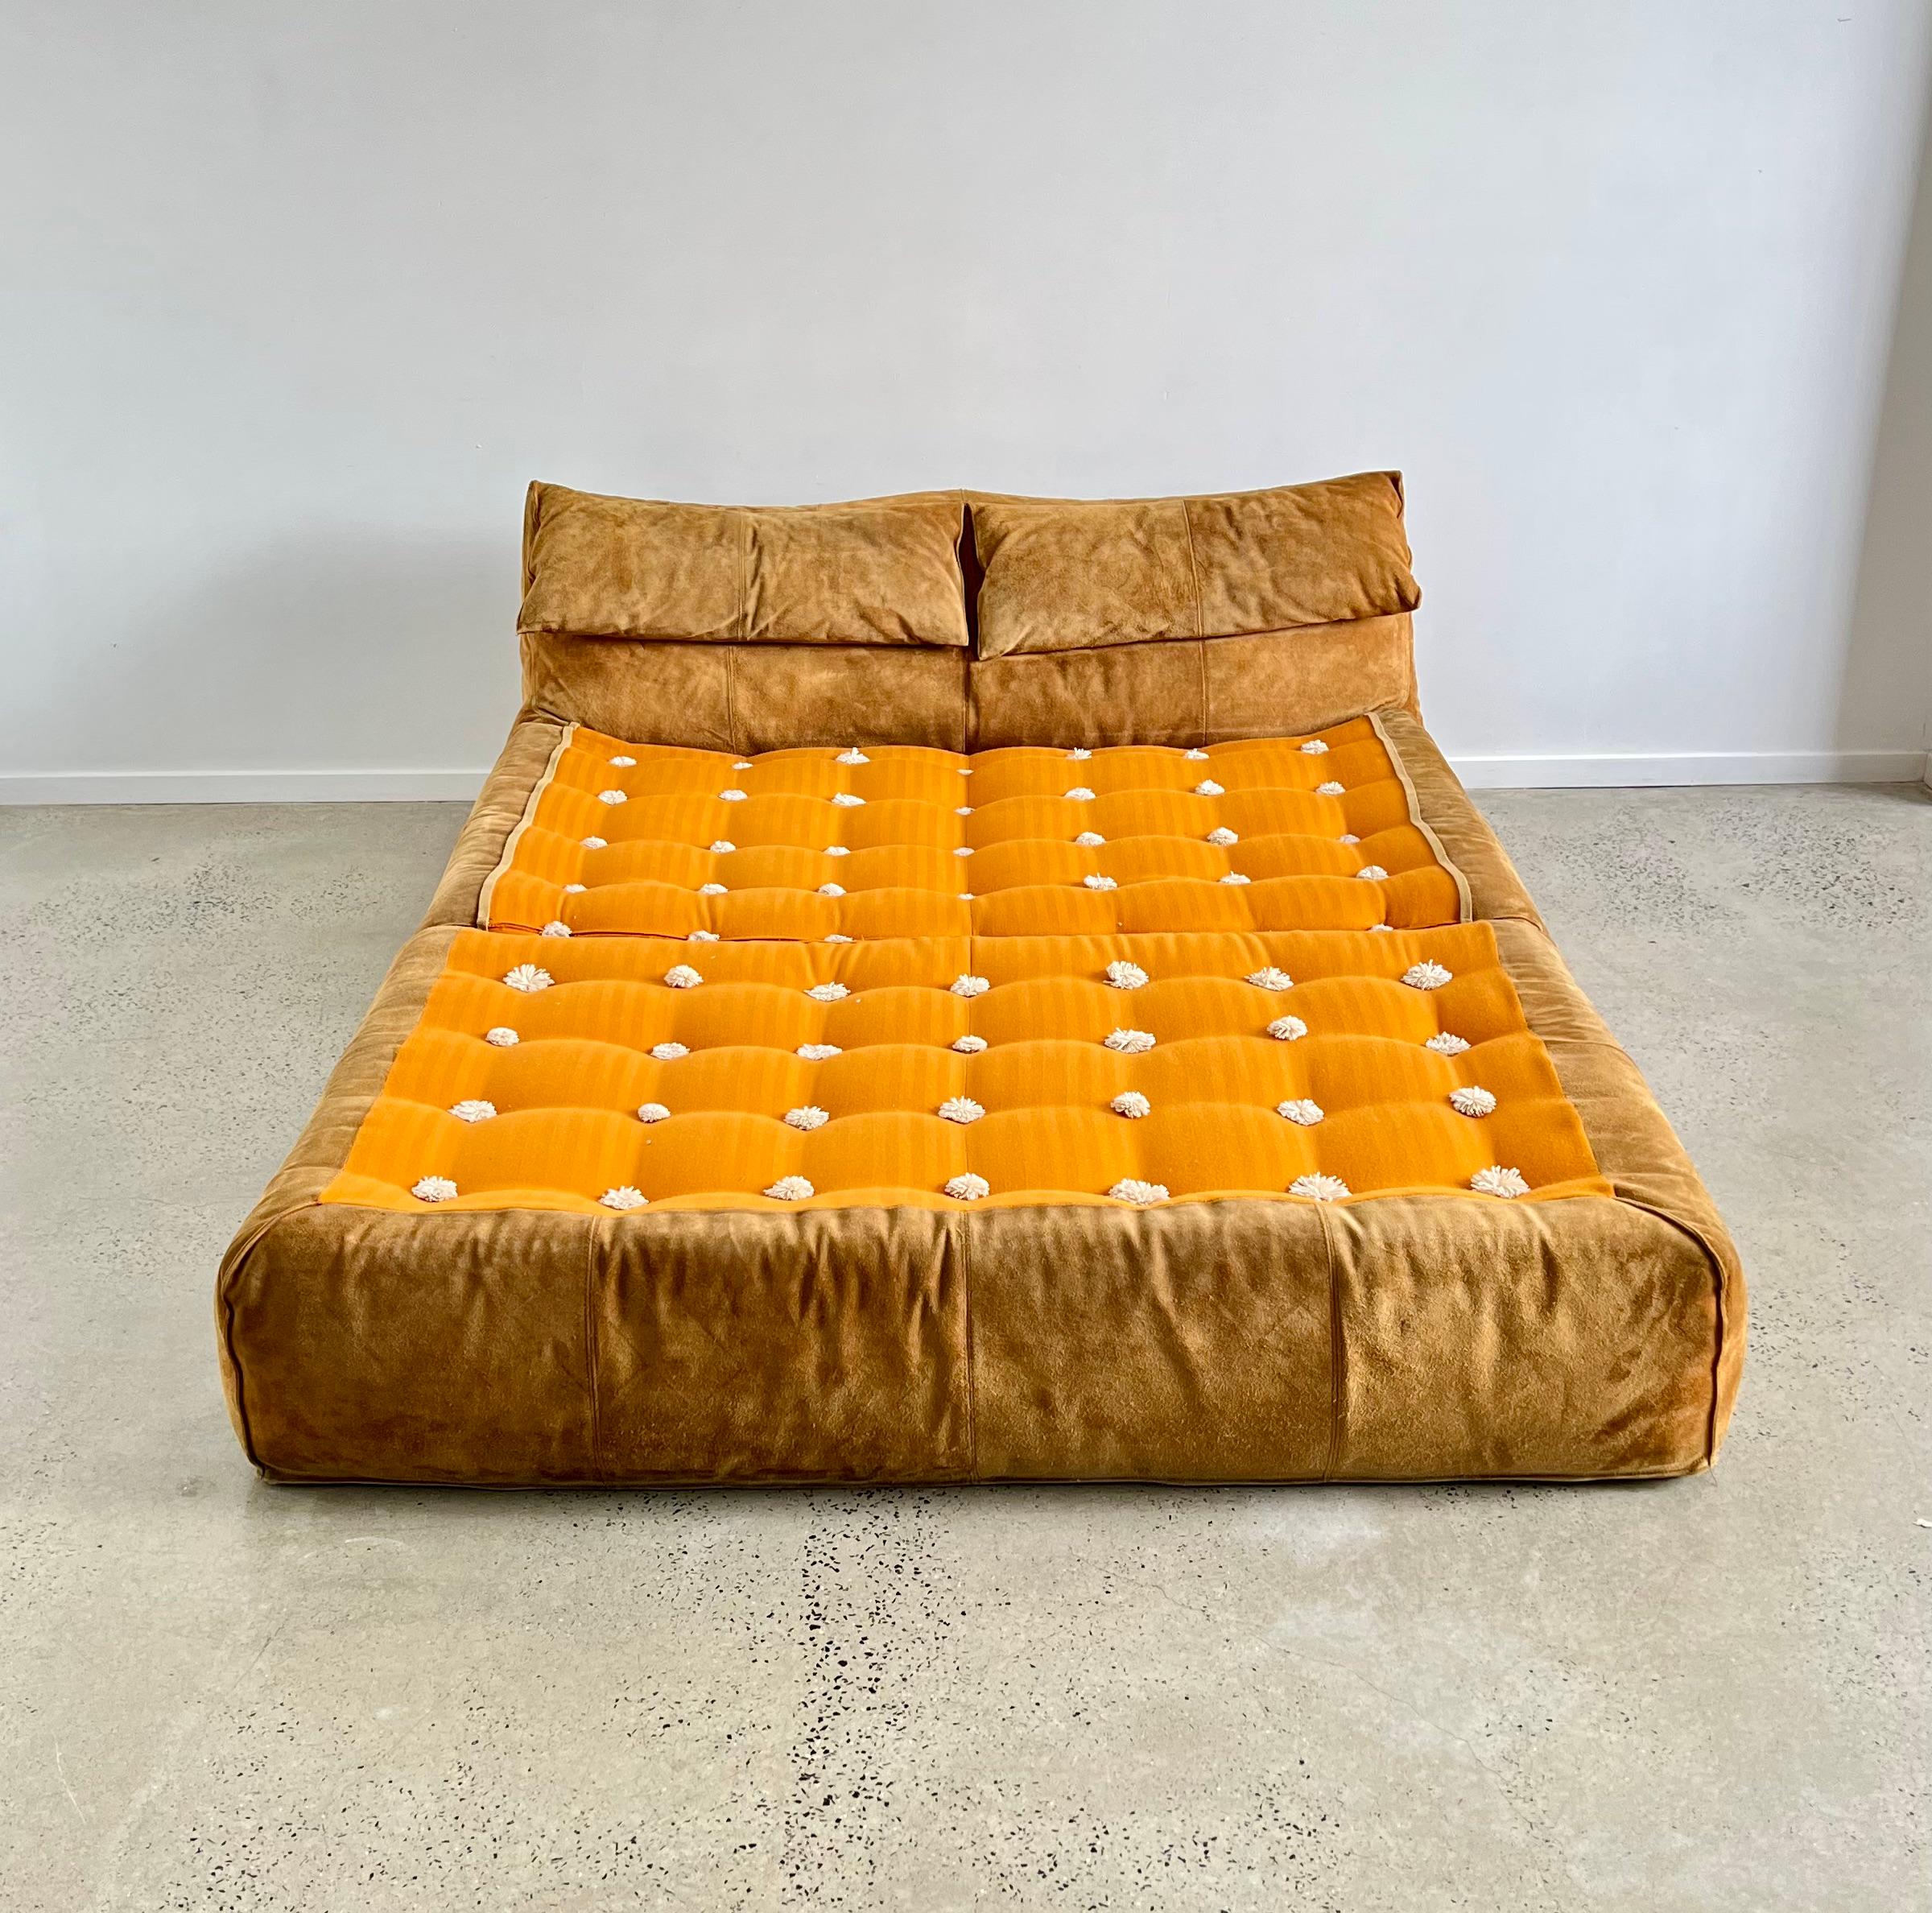 Rare first edition “ Le Bambole-Bamboletto ” daybed designed in 1972 by Mario Bellini and manufactured by C&B Italia in 1976. Labeled C&B which is the name company before became B&B Italia
The international design company B&B Italia began in 1973